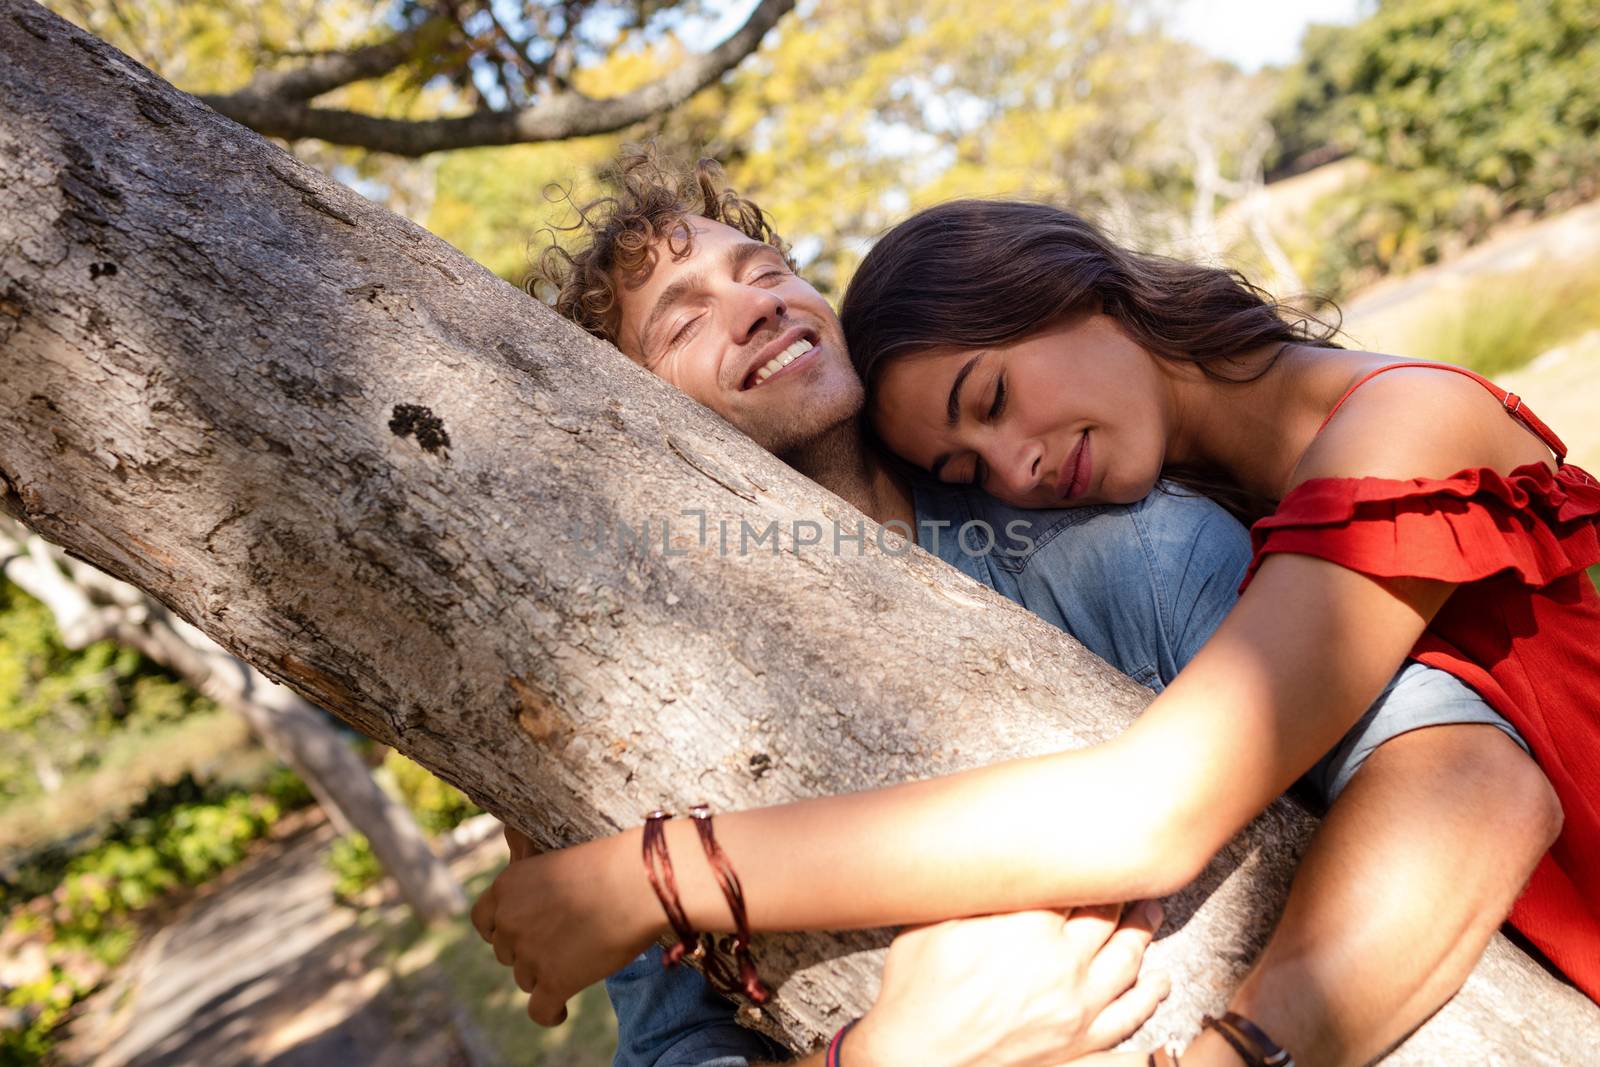 Romantic couple embracing each other in park on a sunny day